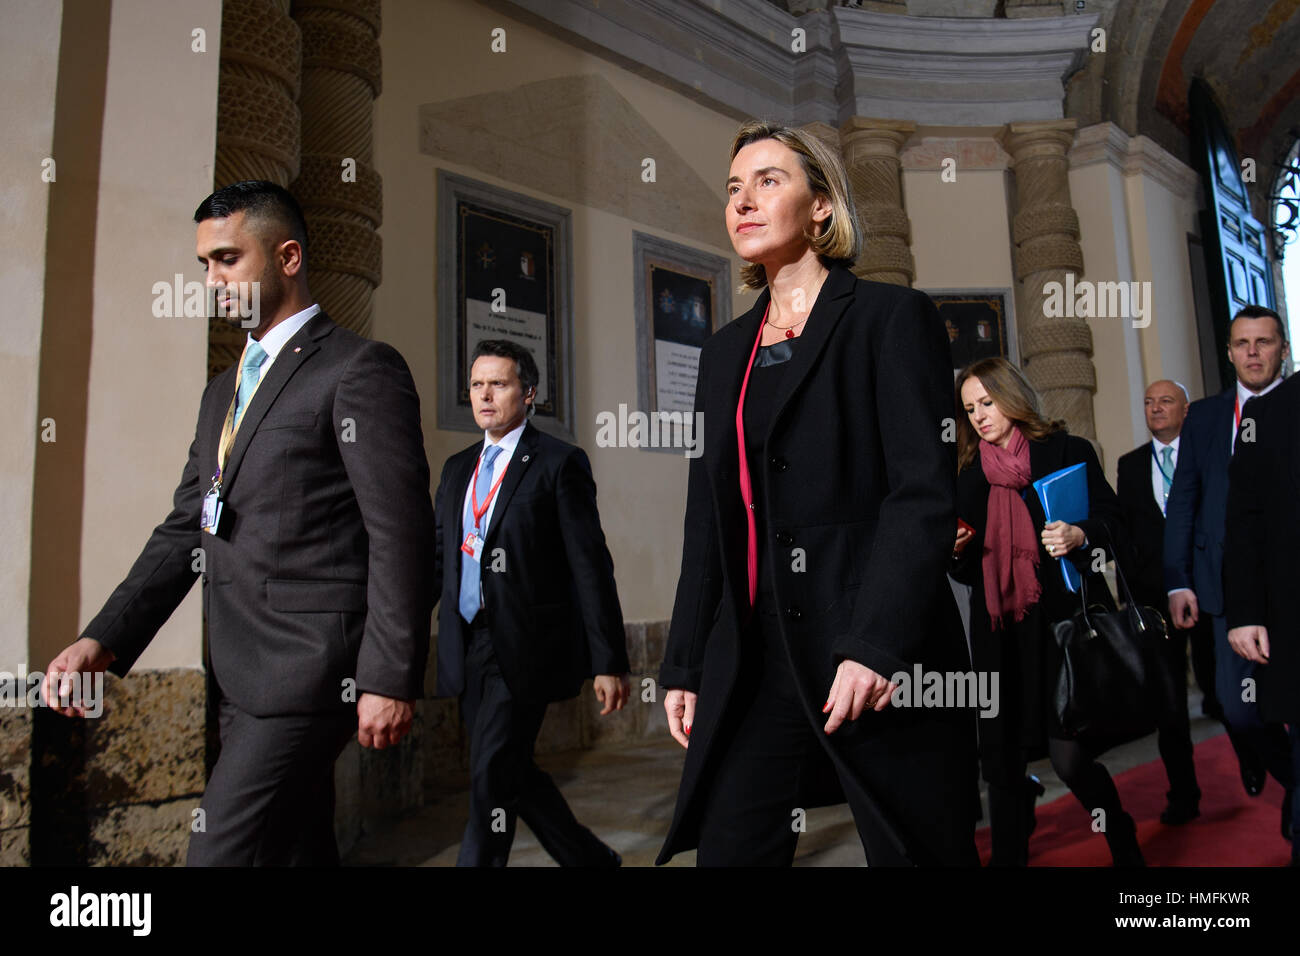 High Representative for Foreign Affairs and Security Policy, Federica Mogherini arriving at the at the Grandmaster's Palace in Valletta, Malta, for an informal summit. Stock Photo